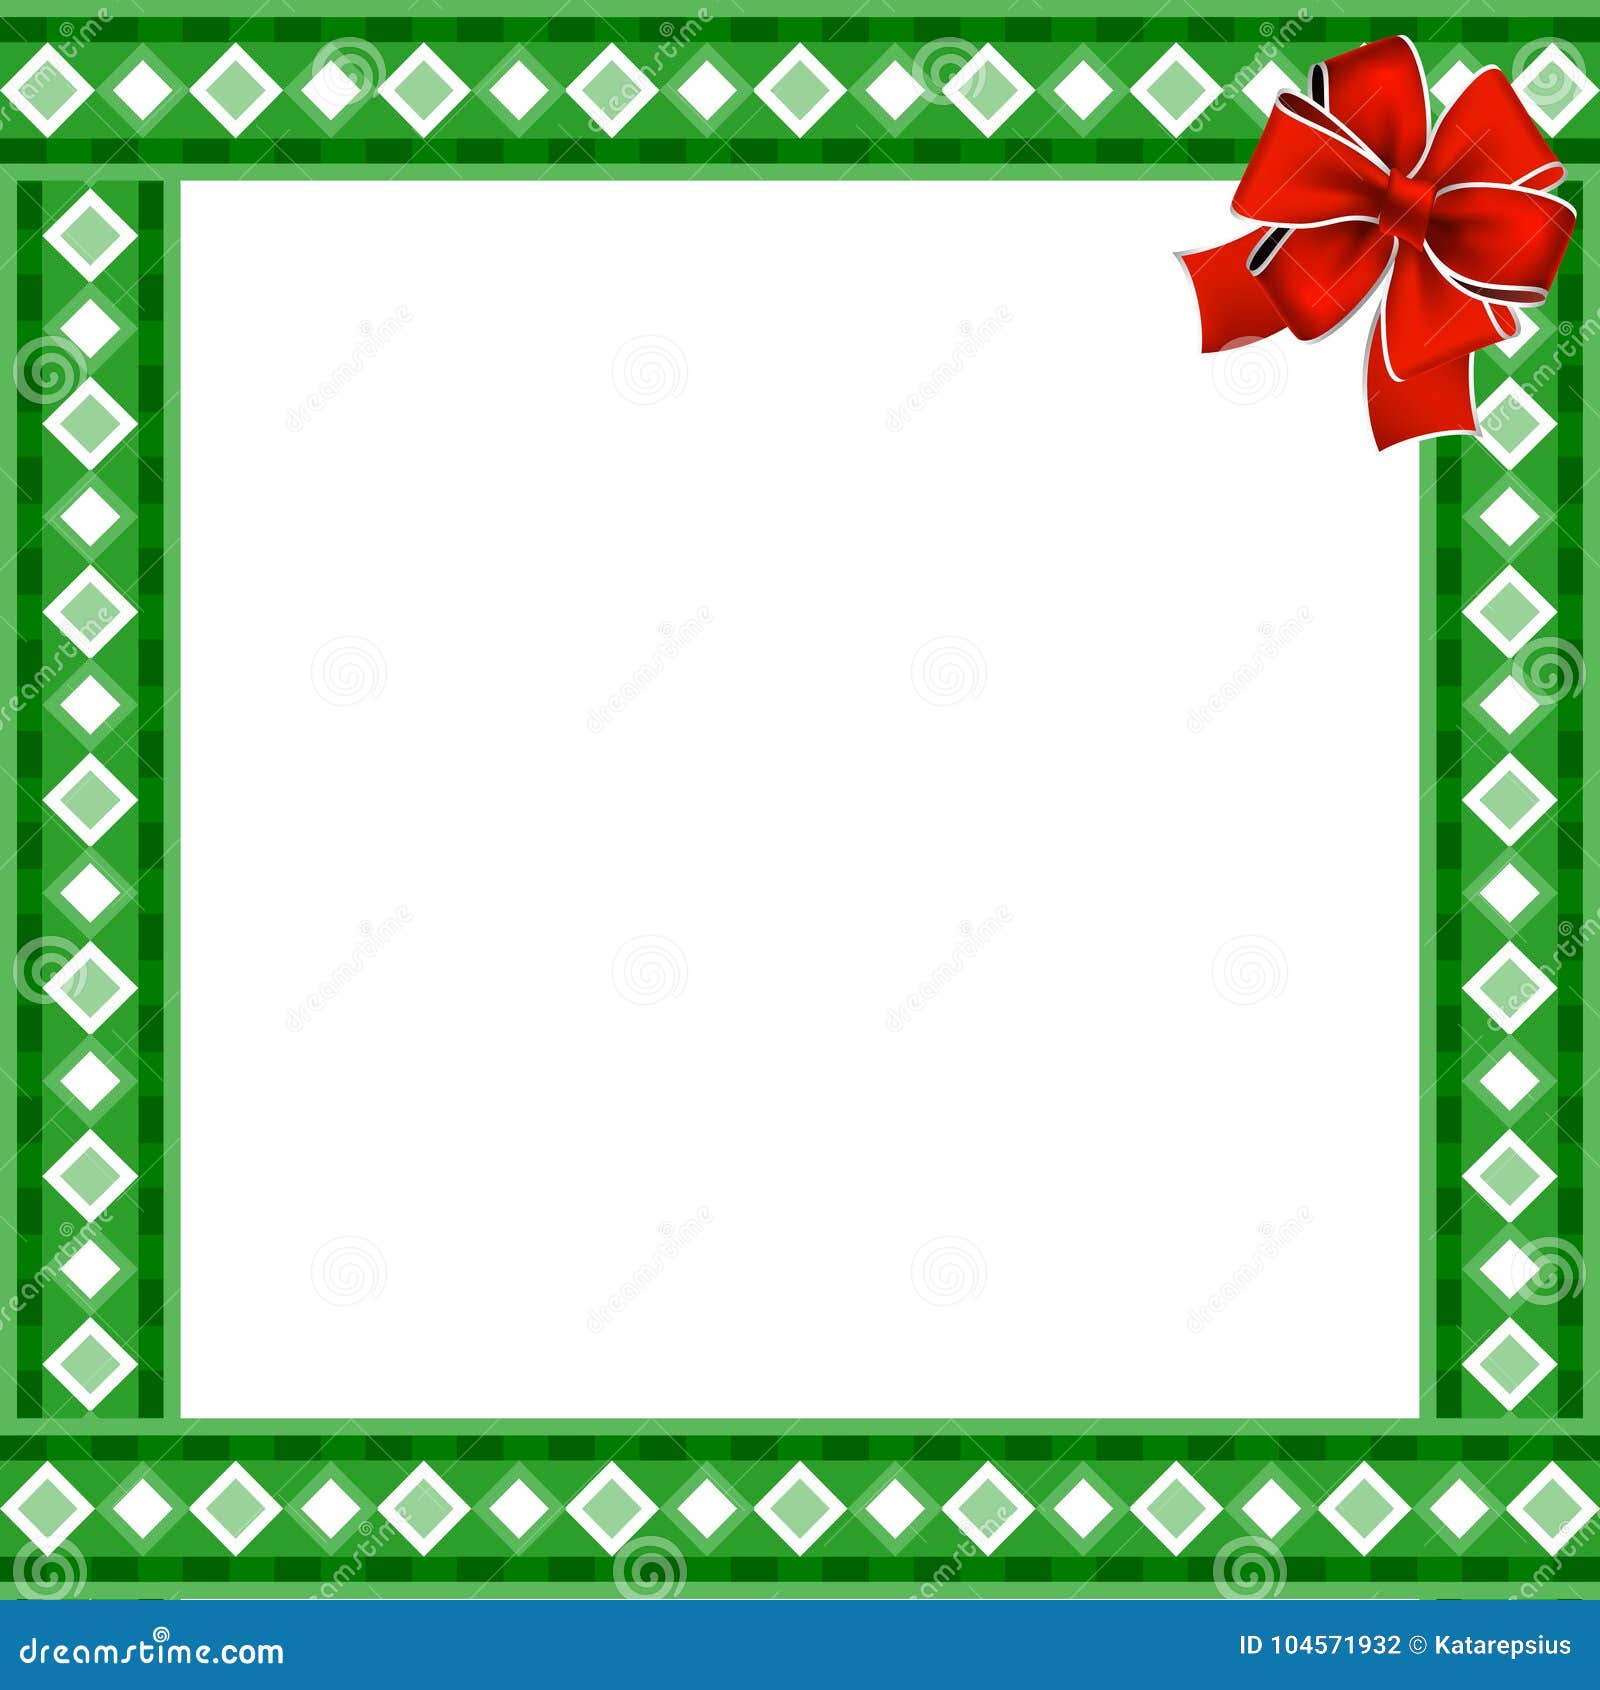 Cute Christmas Or New Year Border With Rhombus Pattern On Green ...